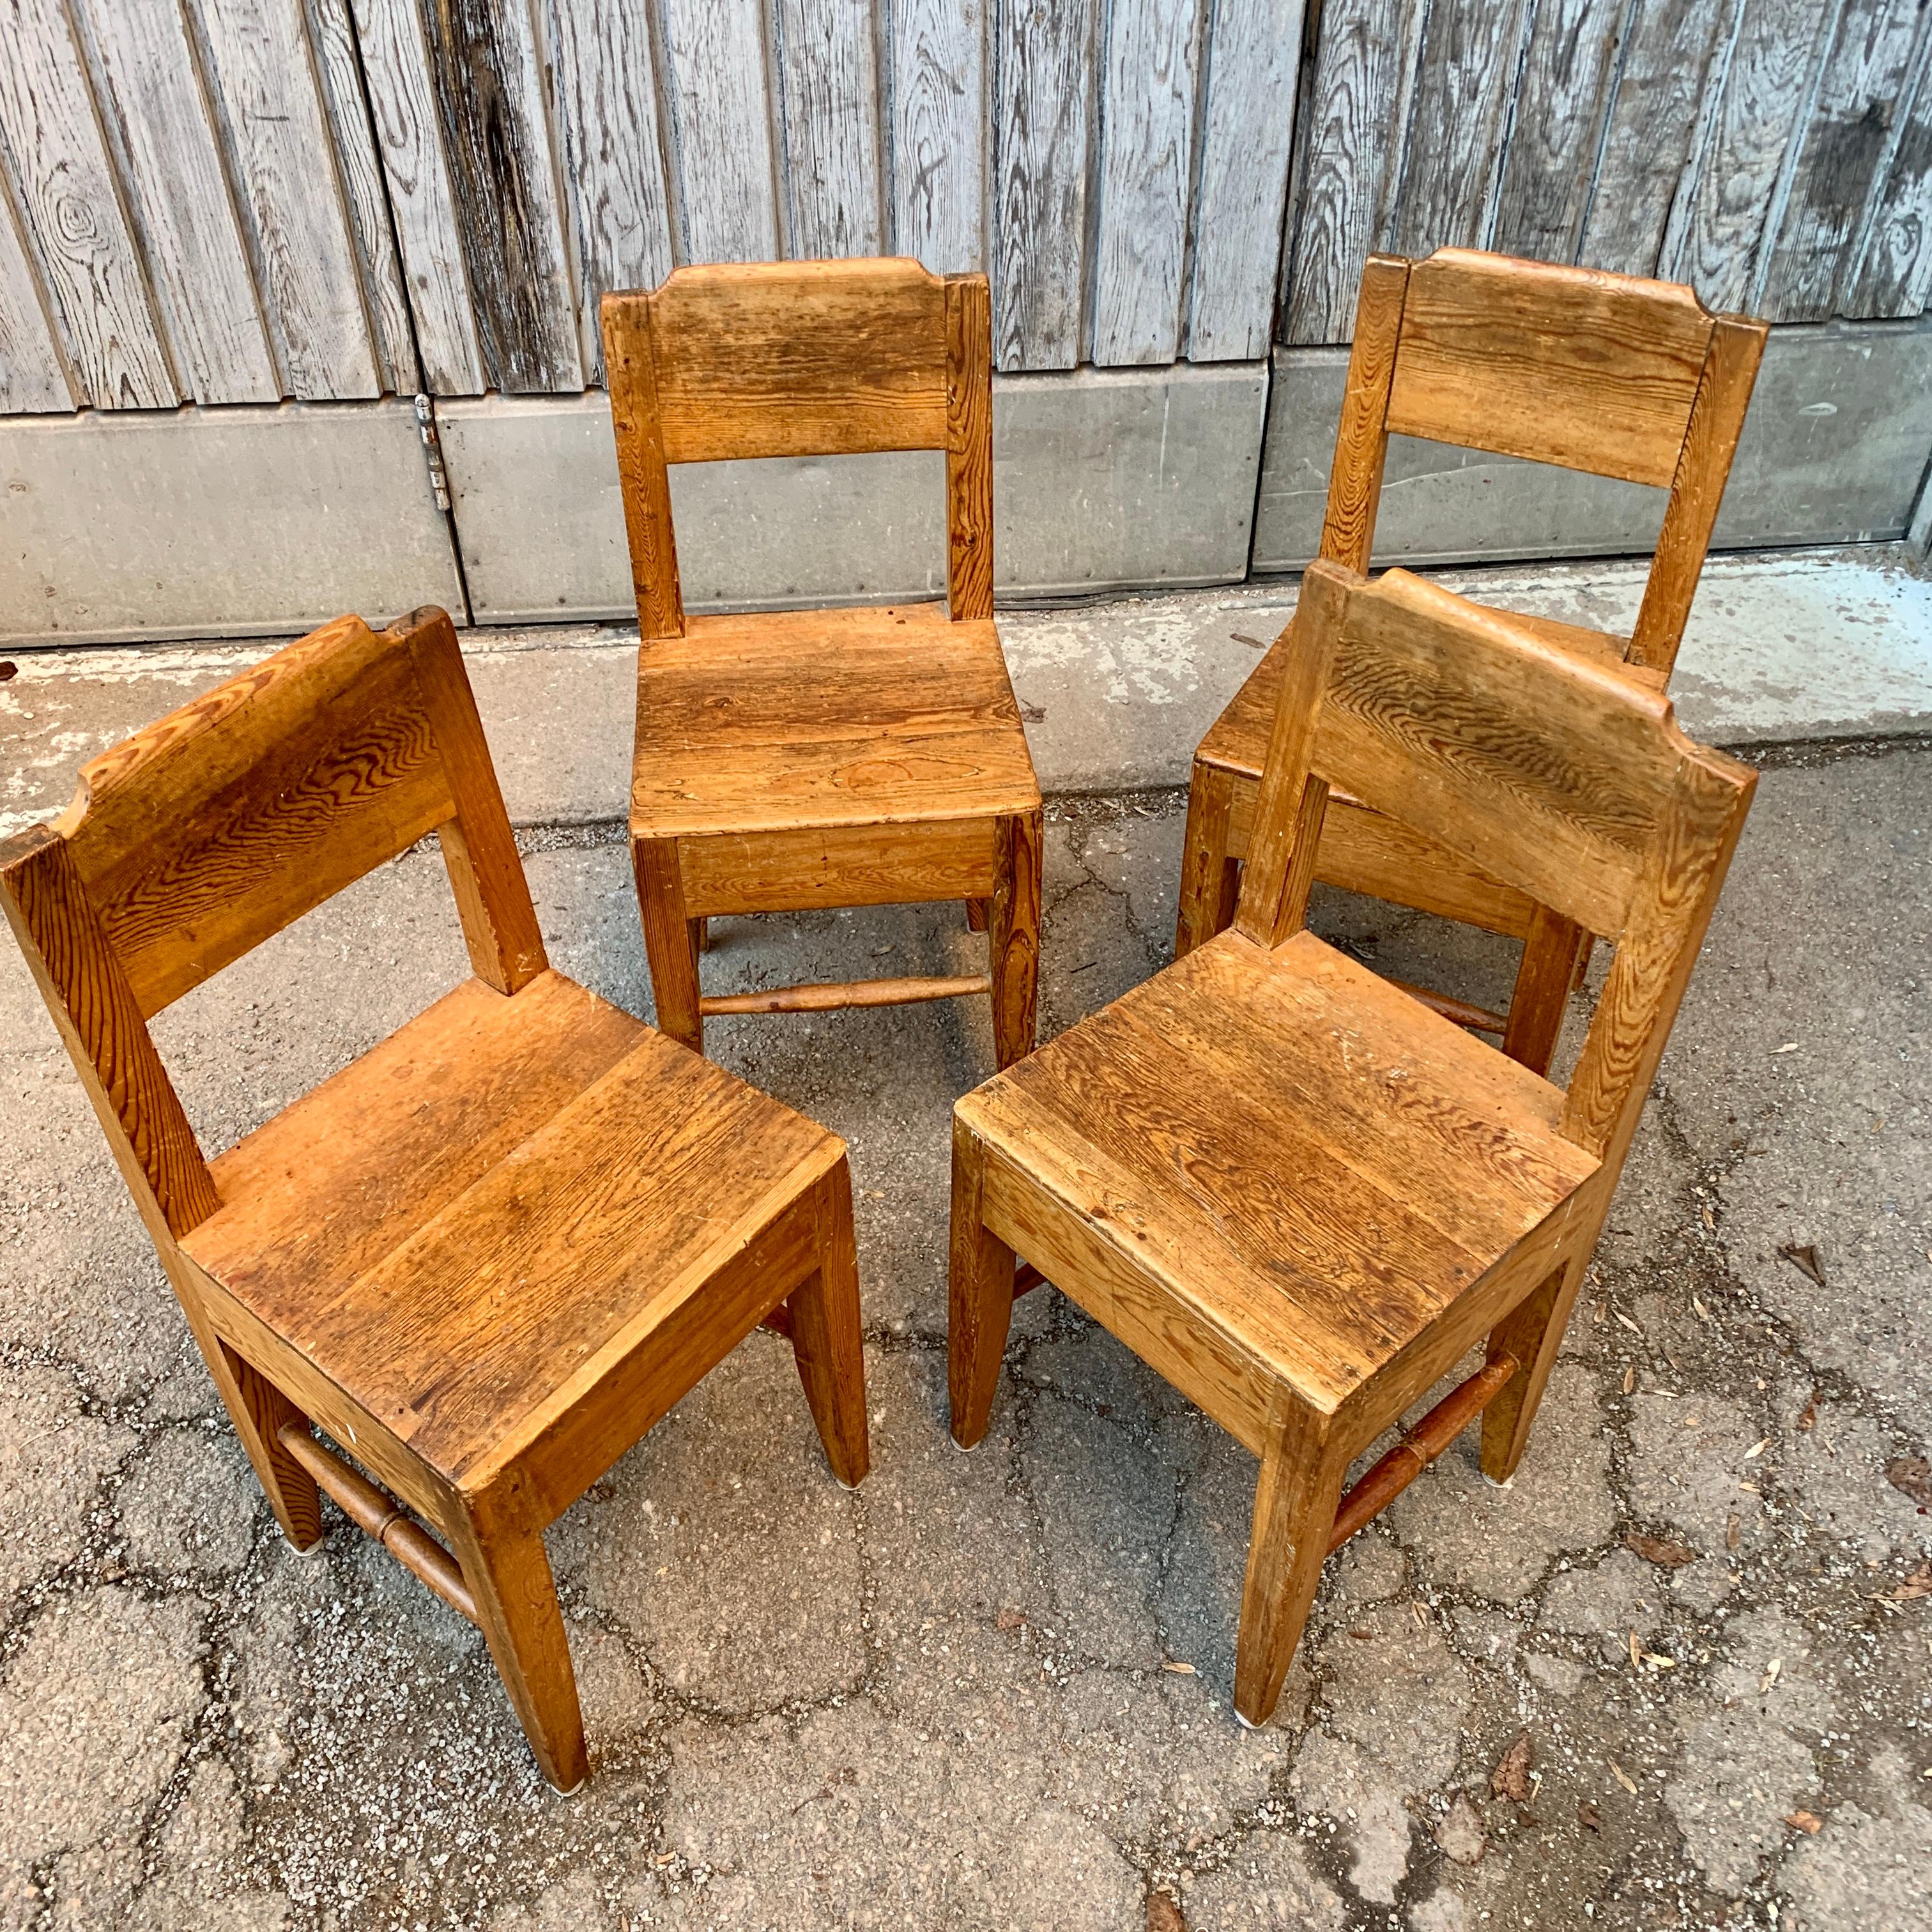 Hand-Crafted Set of 4 Small Swedish Folk Art Chairs, Early 19th Century For Sale